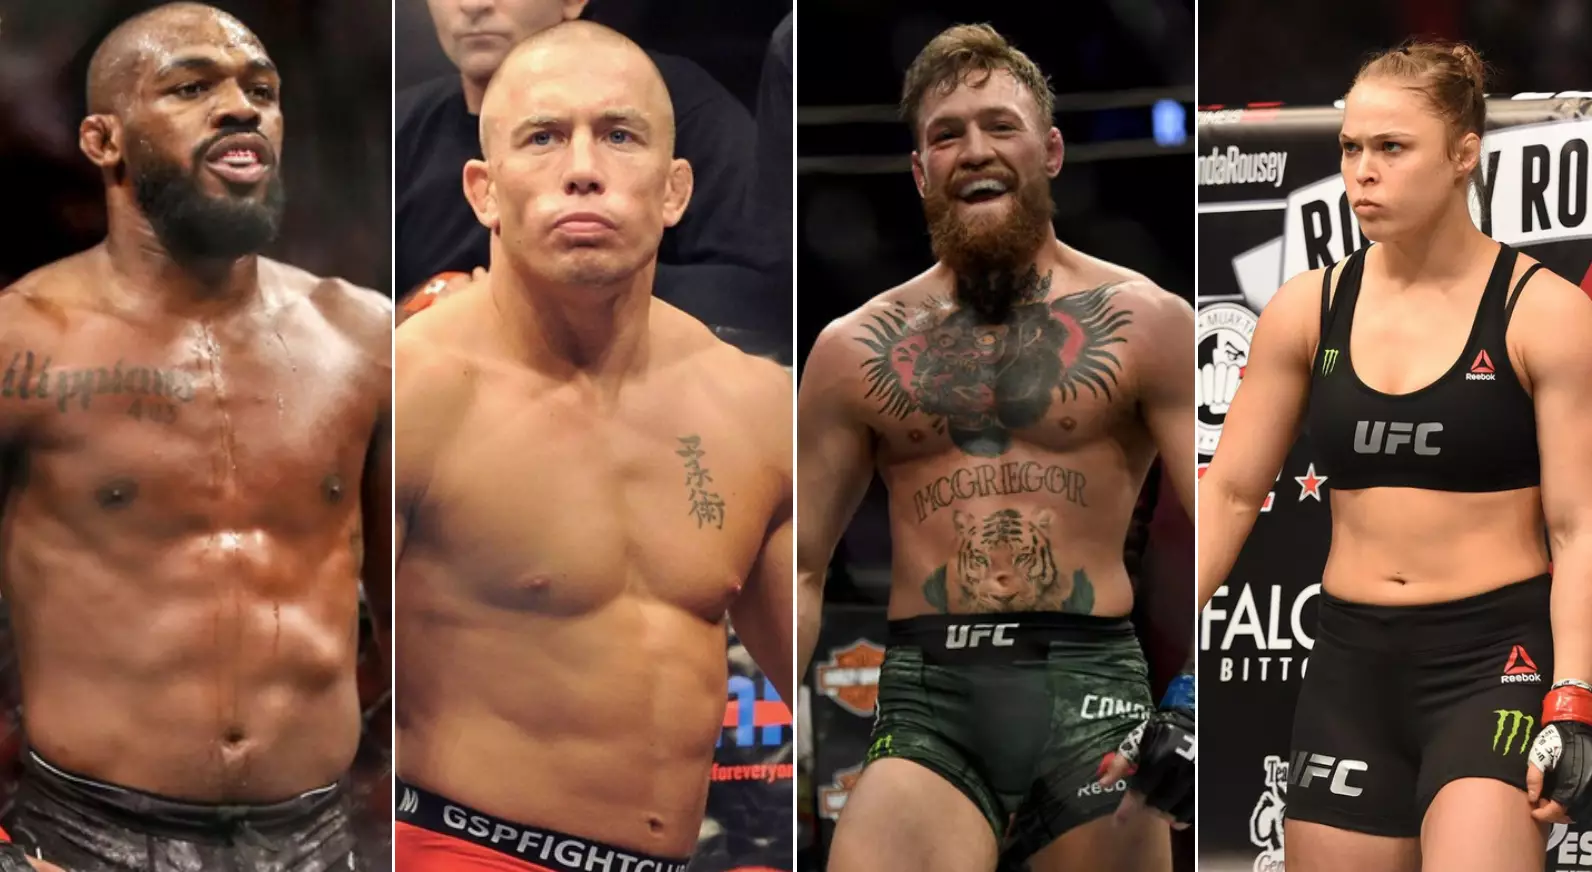 The Top 10 Richest UFC Fighters Of 2020 Have Been Revealed